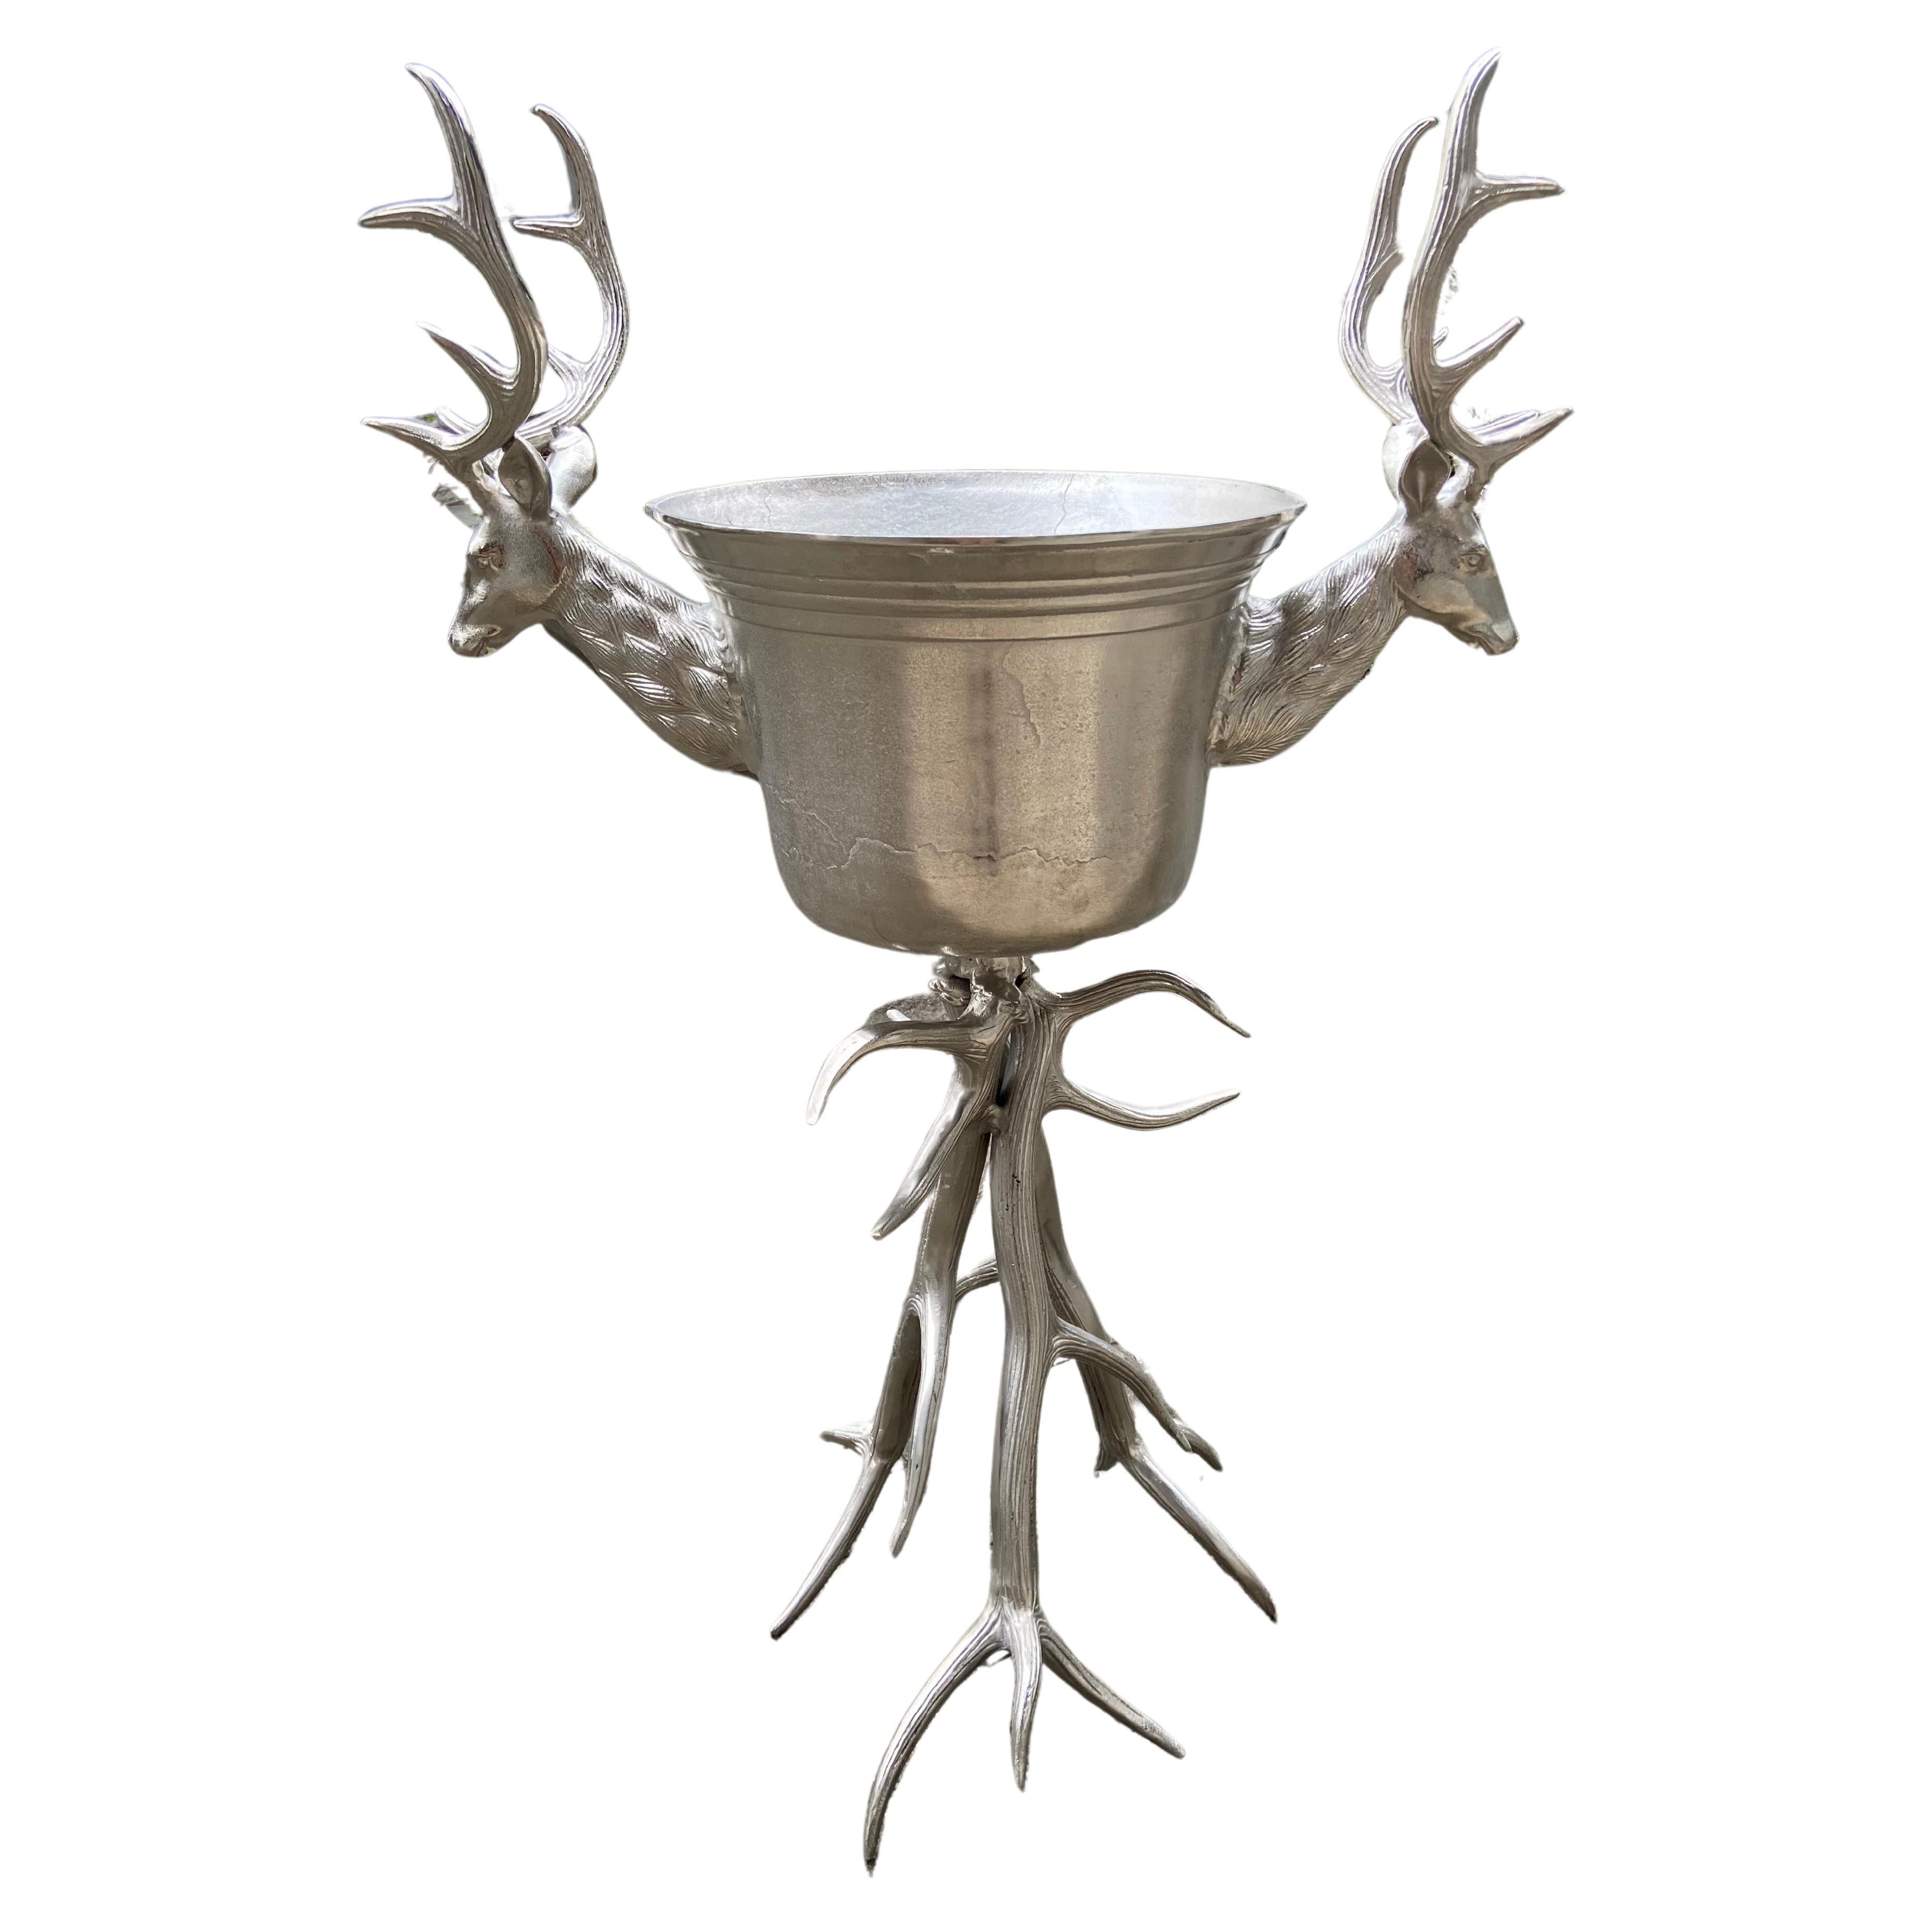 20th Century French Standing Metal Wine Cooler Decorated with Deer Antlers For Sale